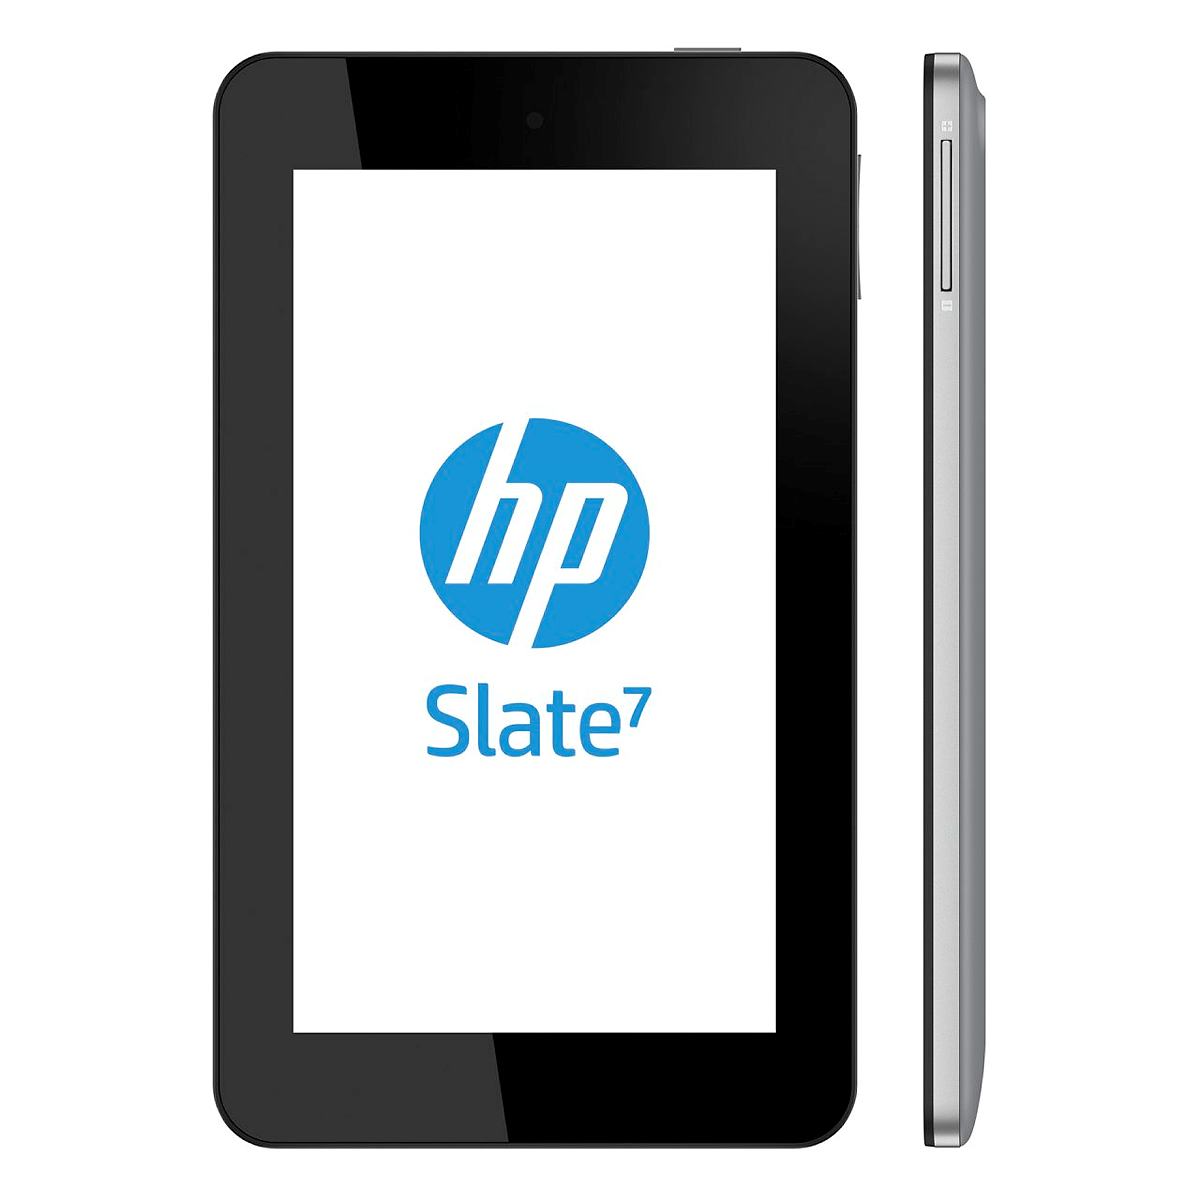 Review HP Slate 7 Tablet - NotebookCheck.net Reviews